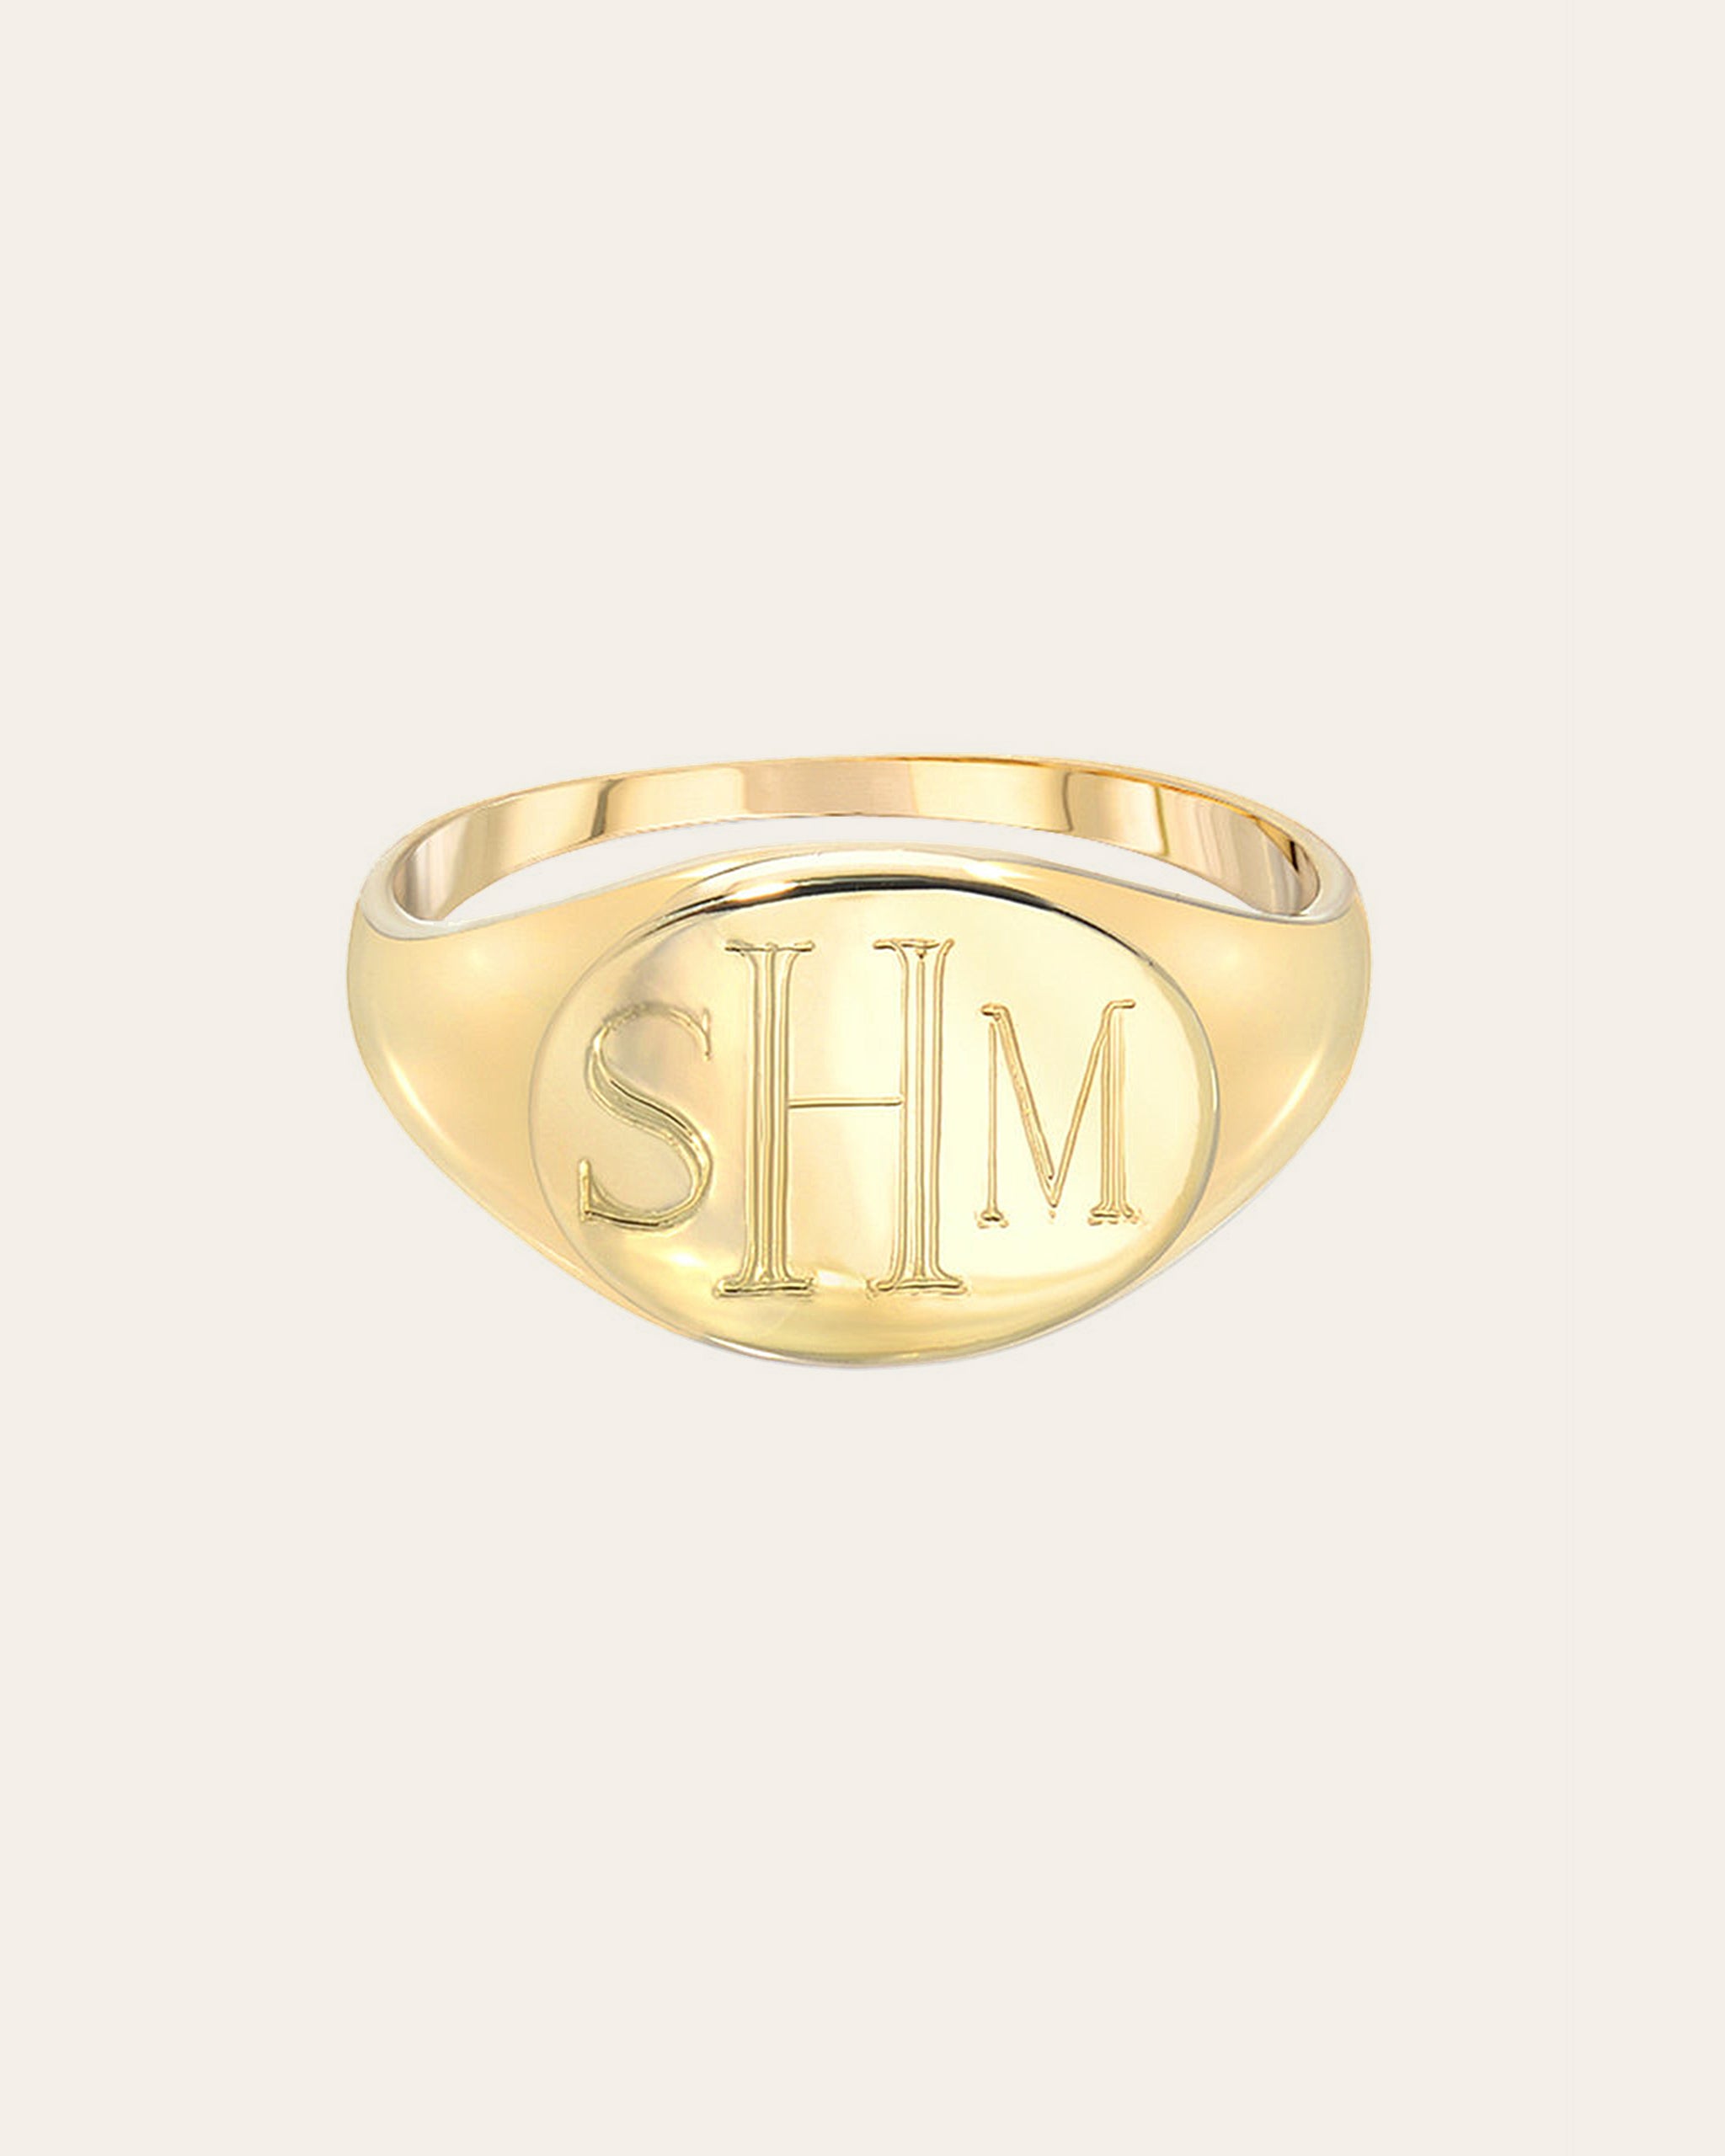 Stunning Men's Custom Monogram Signet Ring, Choose from Sterling Silver, Vermeil or Gold Versions 9 1/2 / Yellow Vermeil (Yellow Gold Over Silver)